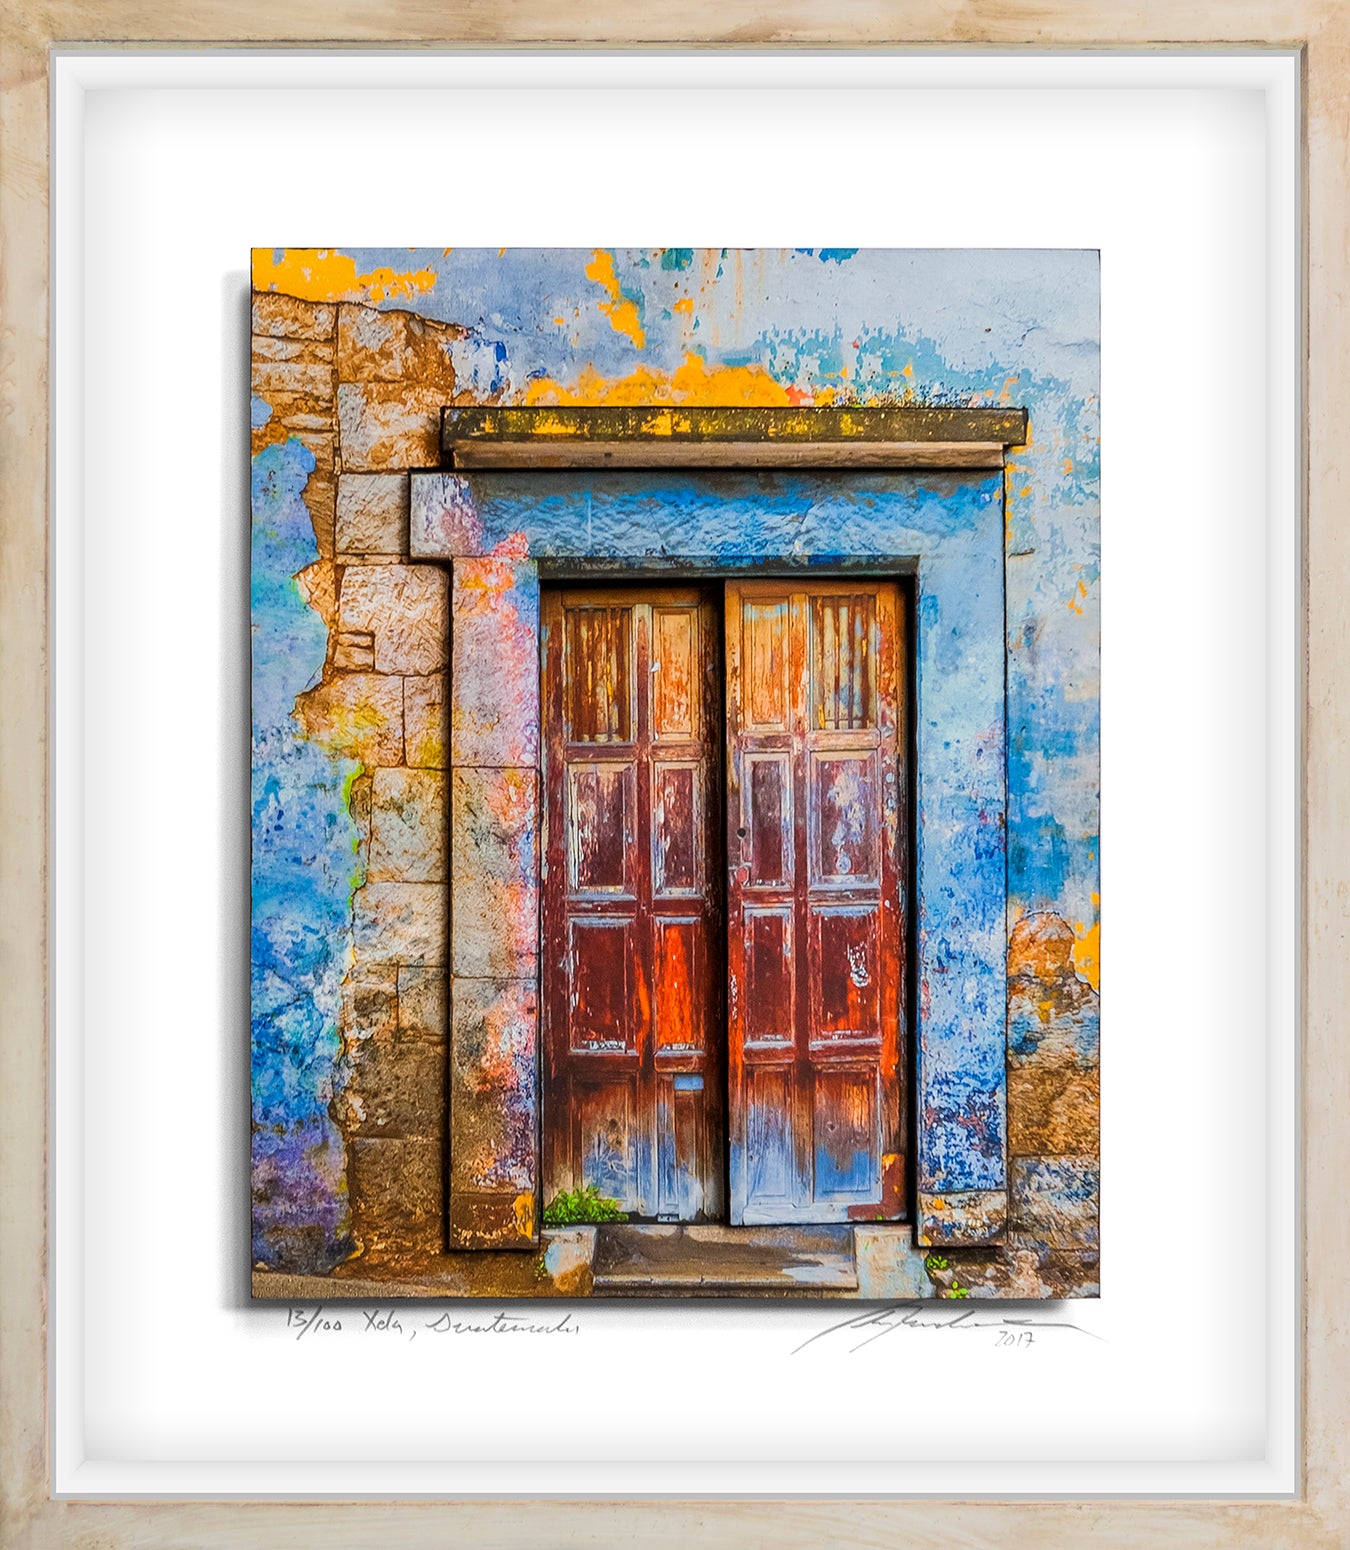 Fine art 3D handmade artisan doors of the world, limited and unlimited collections from Guatemala, Mexico and the world. Doors of the Worlds by Alan Benchoam